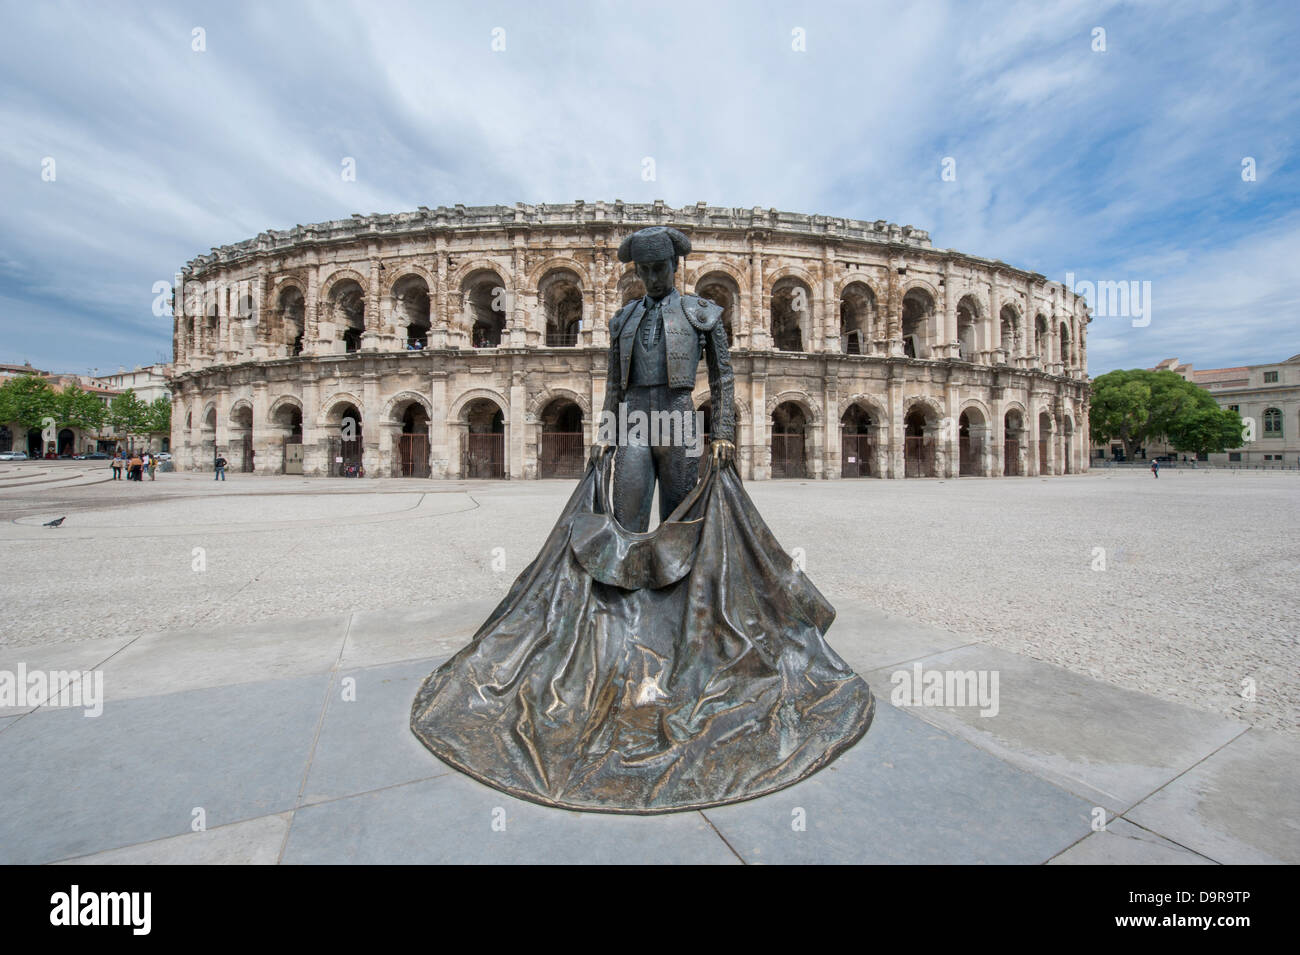 Statue of the famous bull-fighter Nimeño in front of Les Arénes, the roman amphitheatre in Nîmes, Languedoc, France Stock Photo